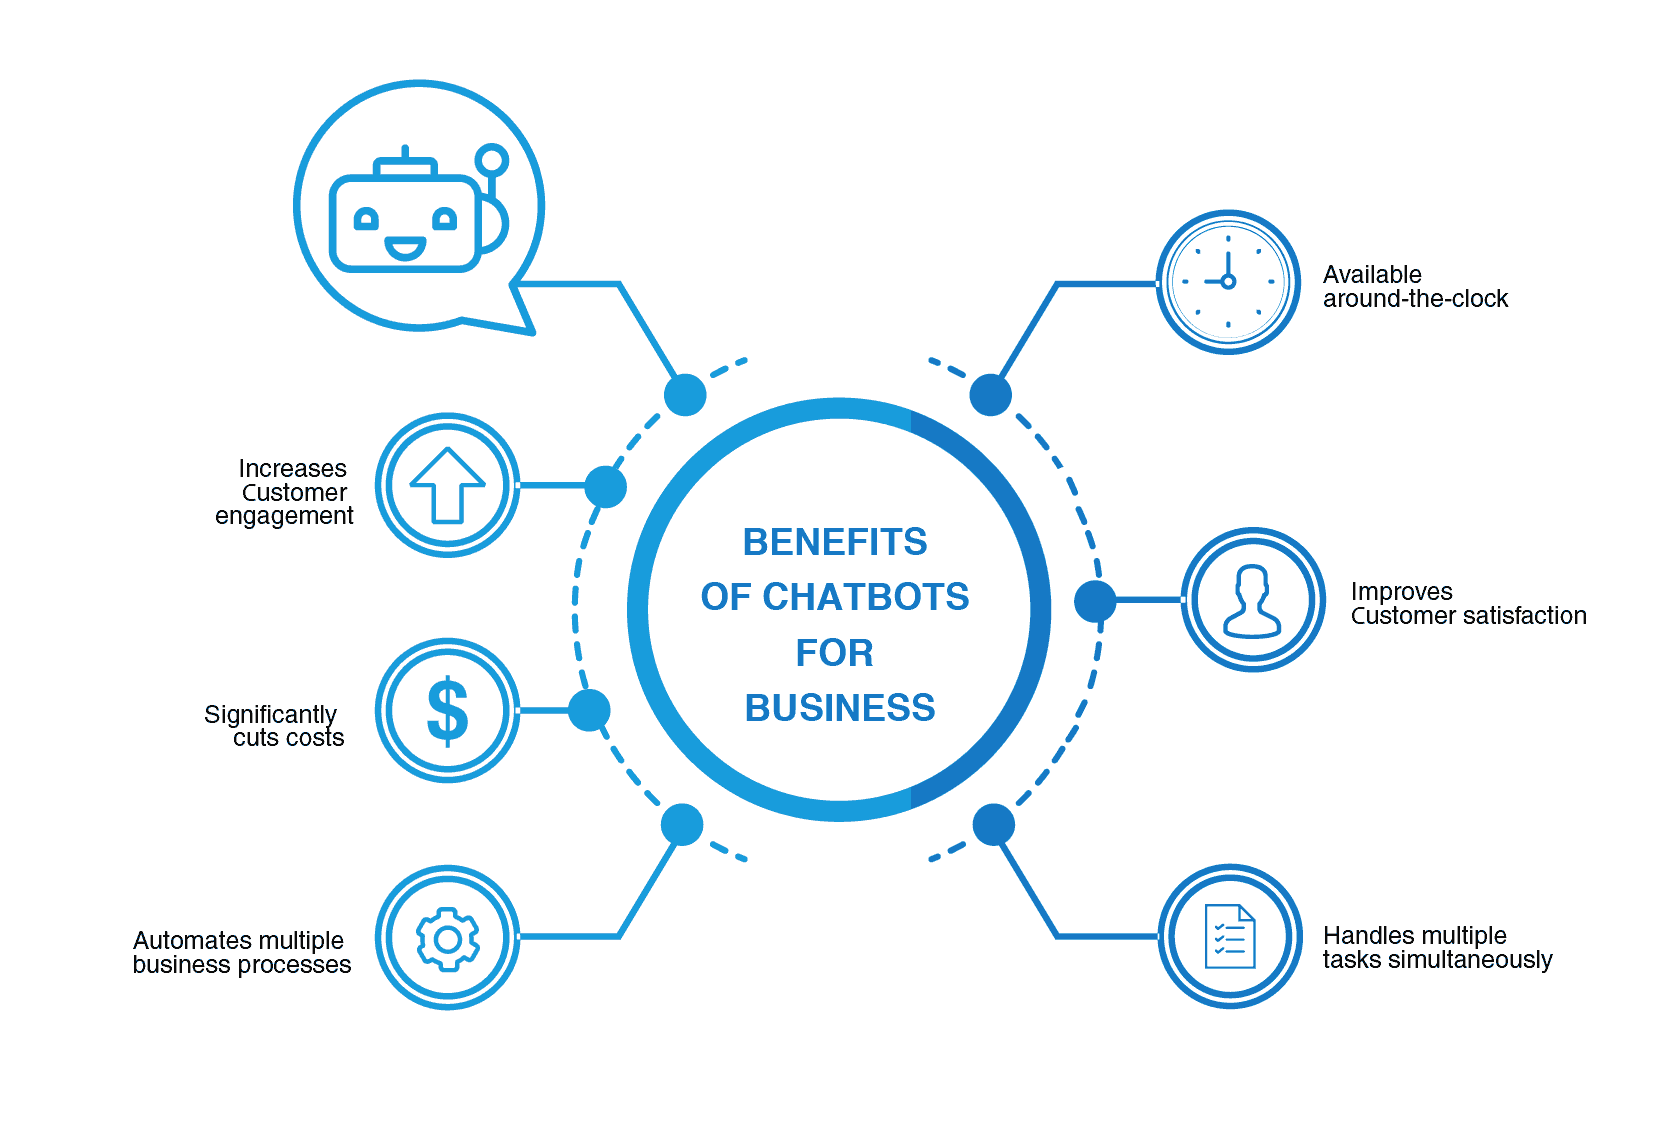 benefits-of-chatbots-for-business.